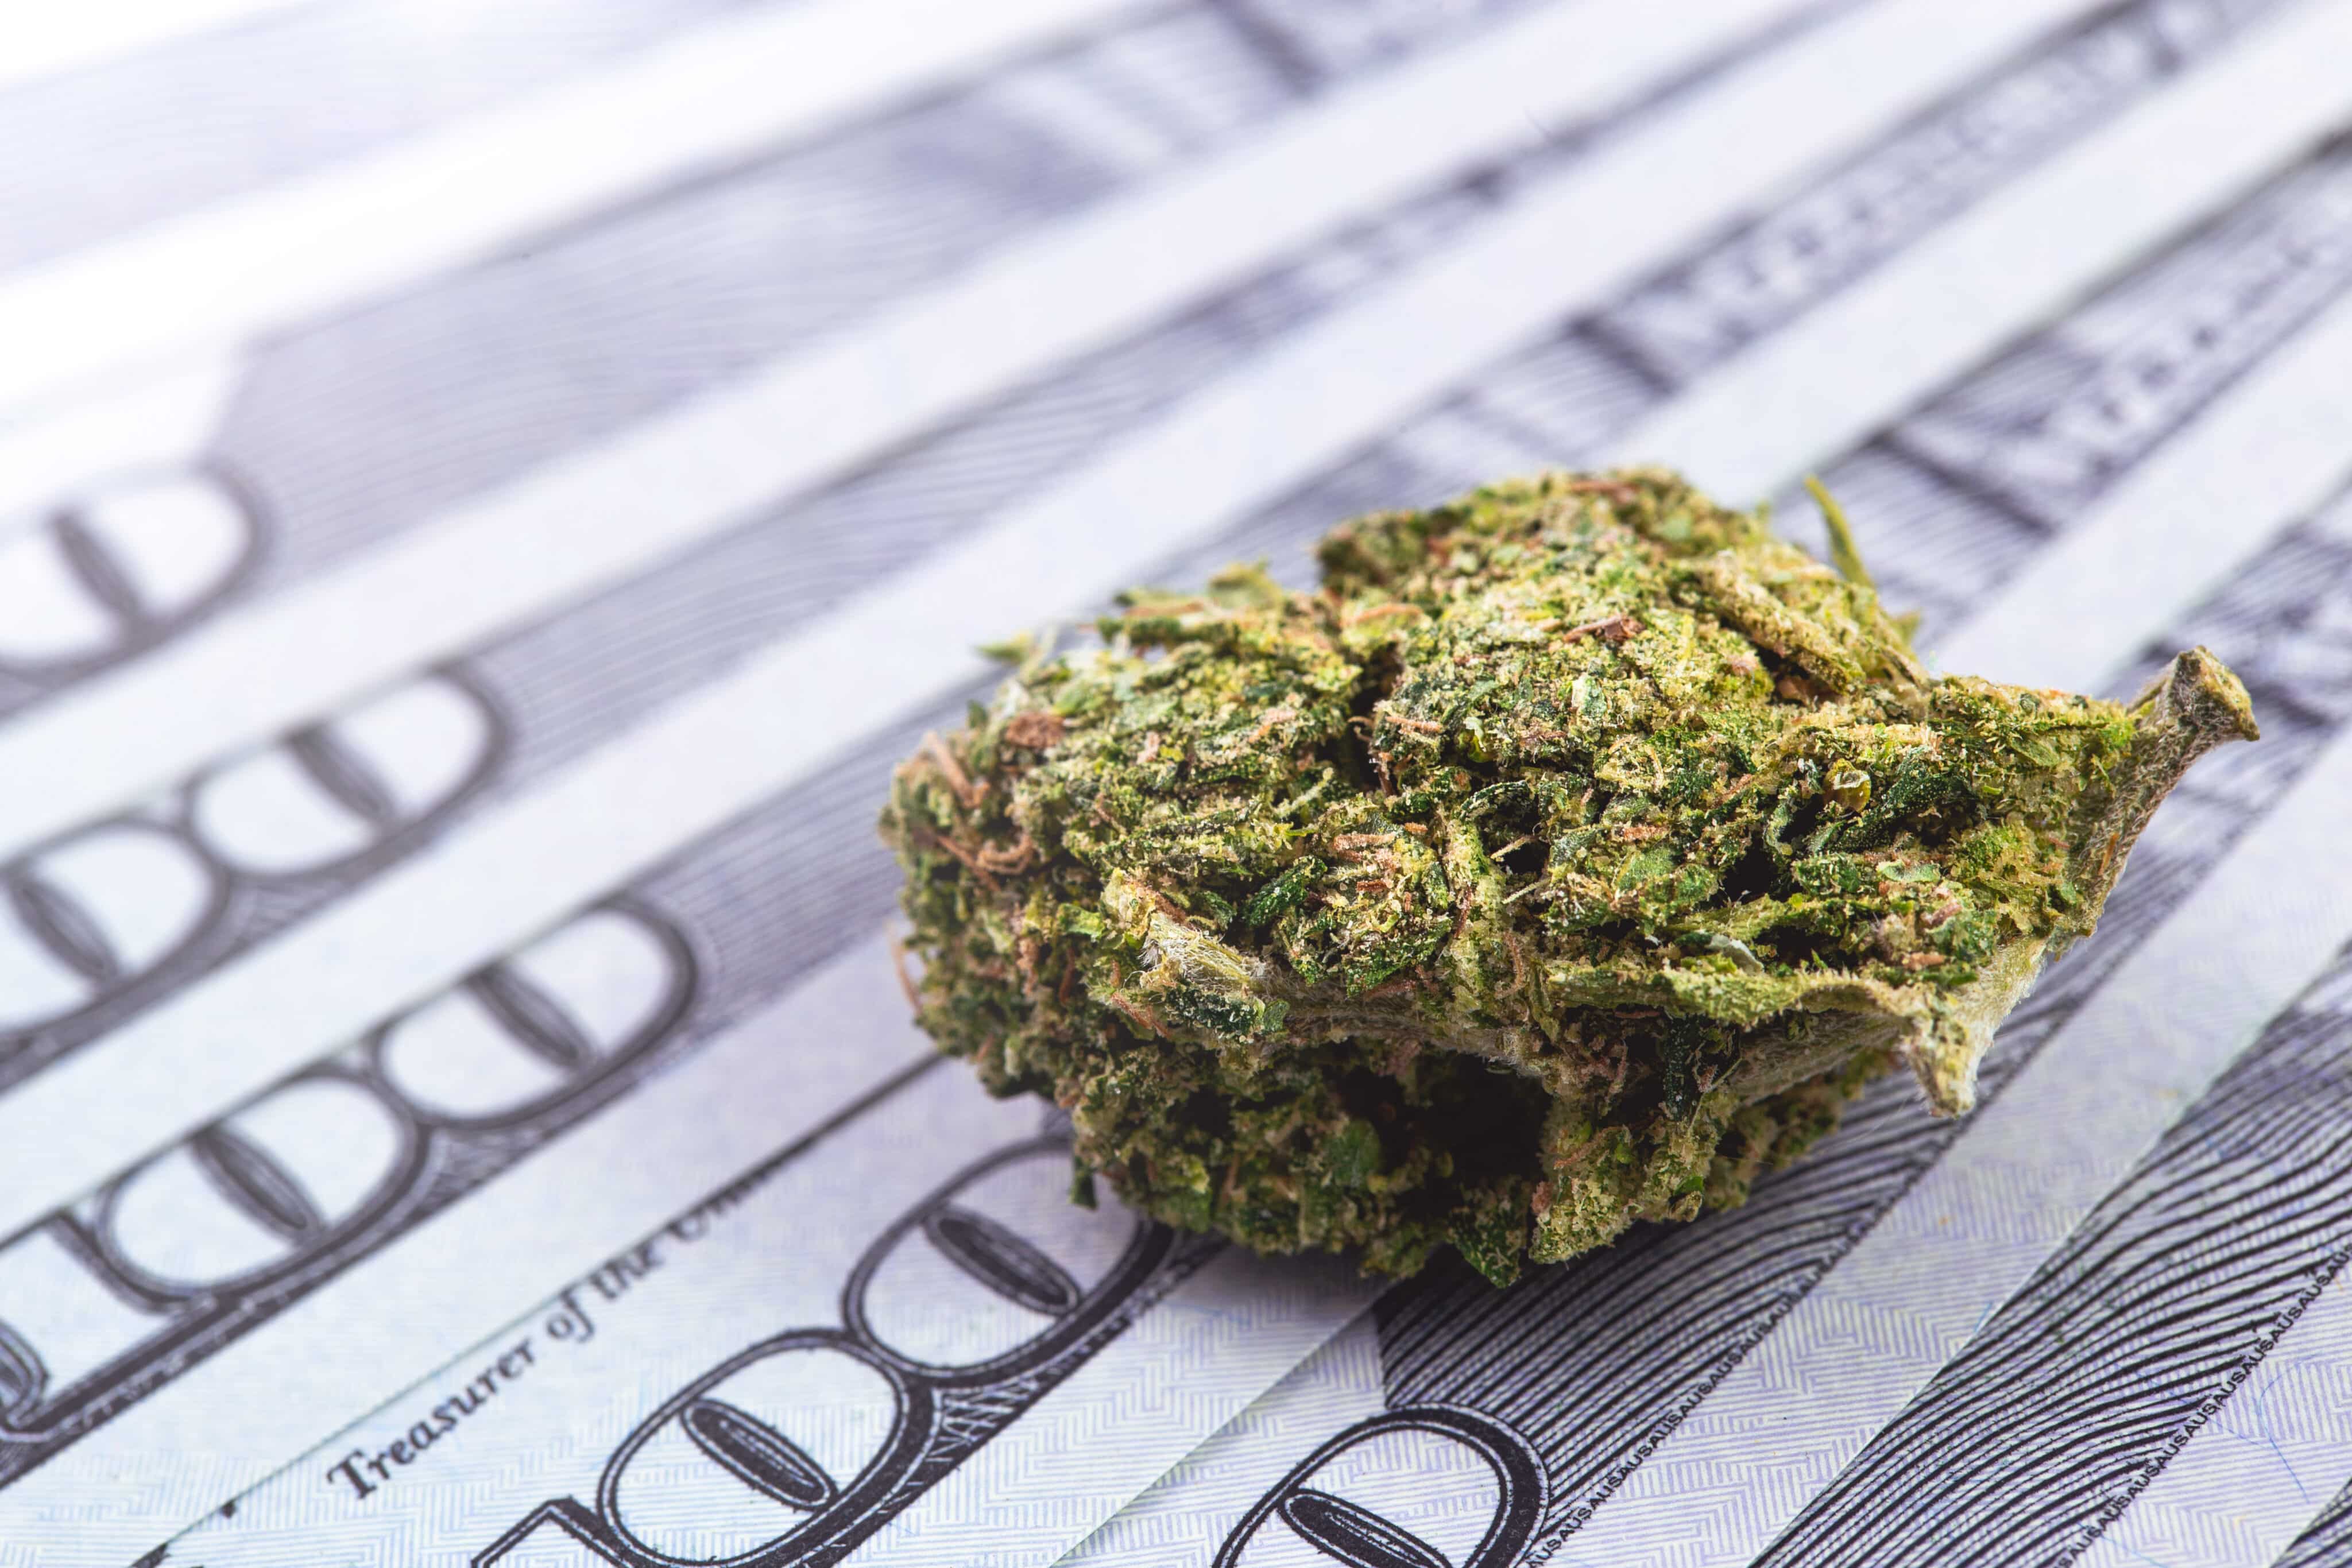 Recent Report Proposes Adult-Use Cannabis Sales Growth up to $50.7B by 2028